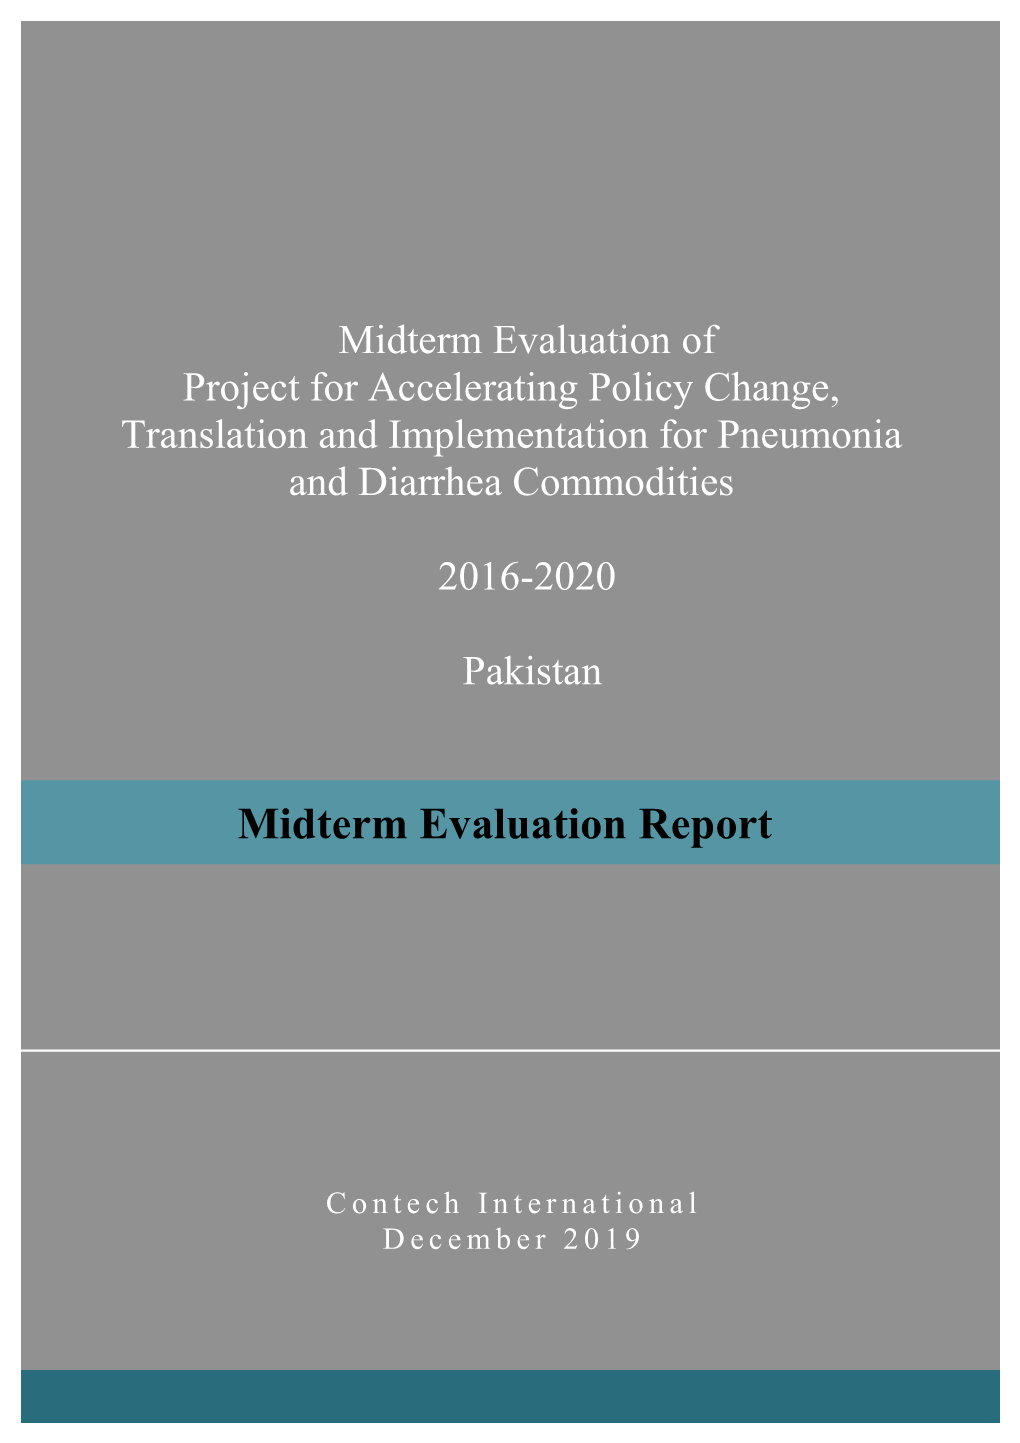 Midterm Evaluation of Project for Accelerating Policy Change, Translation and Implementation for Pneumonia and Diarrhea Commodities 2016-2020 Pakistan